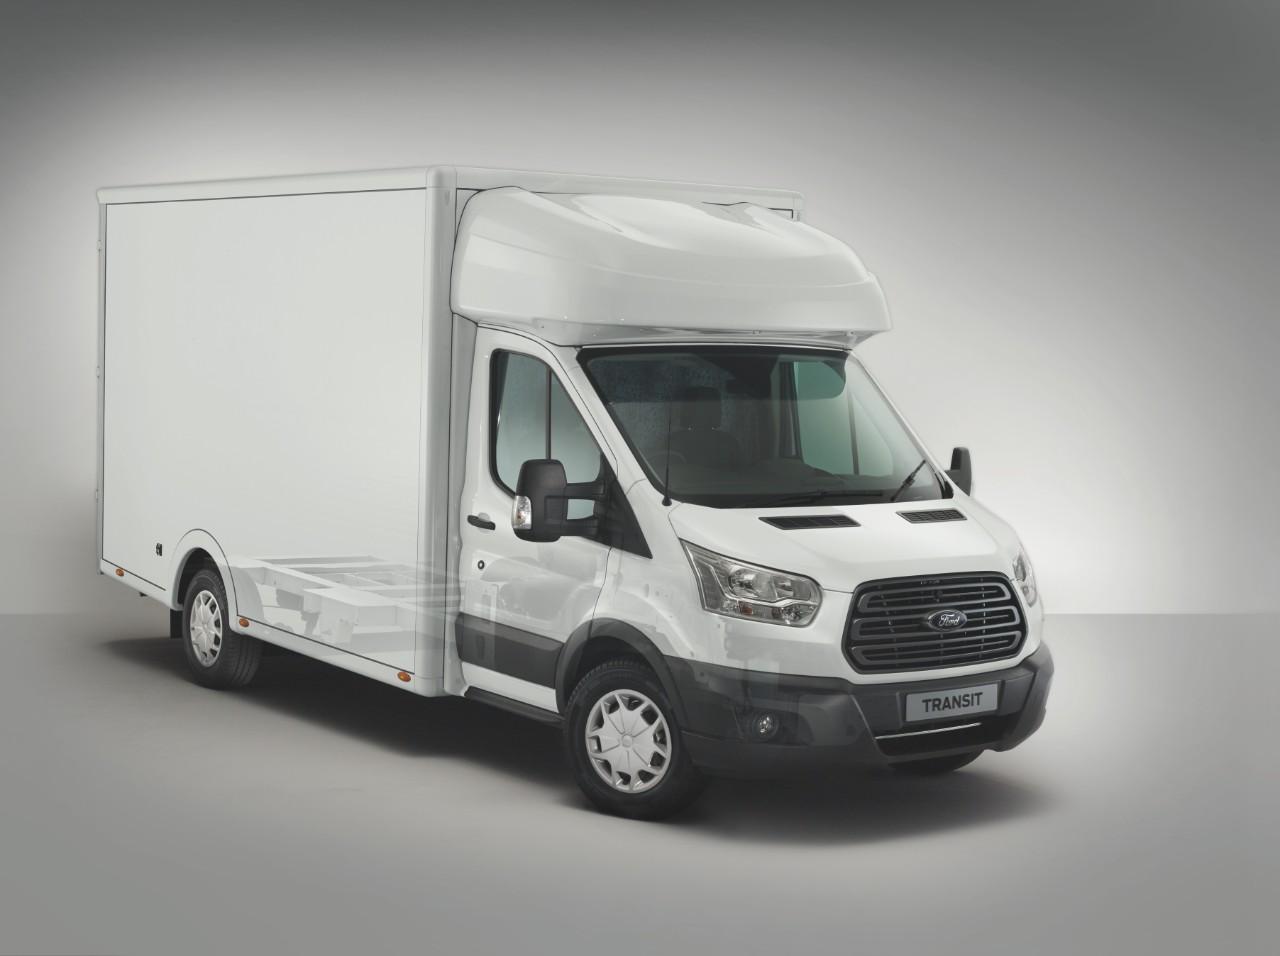 Ford unveils new Transit skeletal chassis cab - Trucking News ...